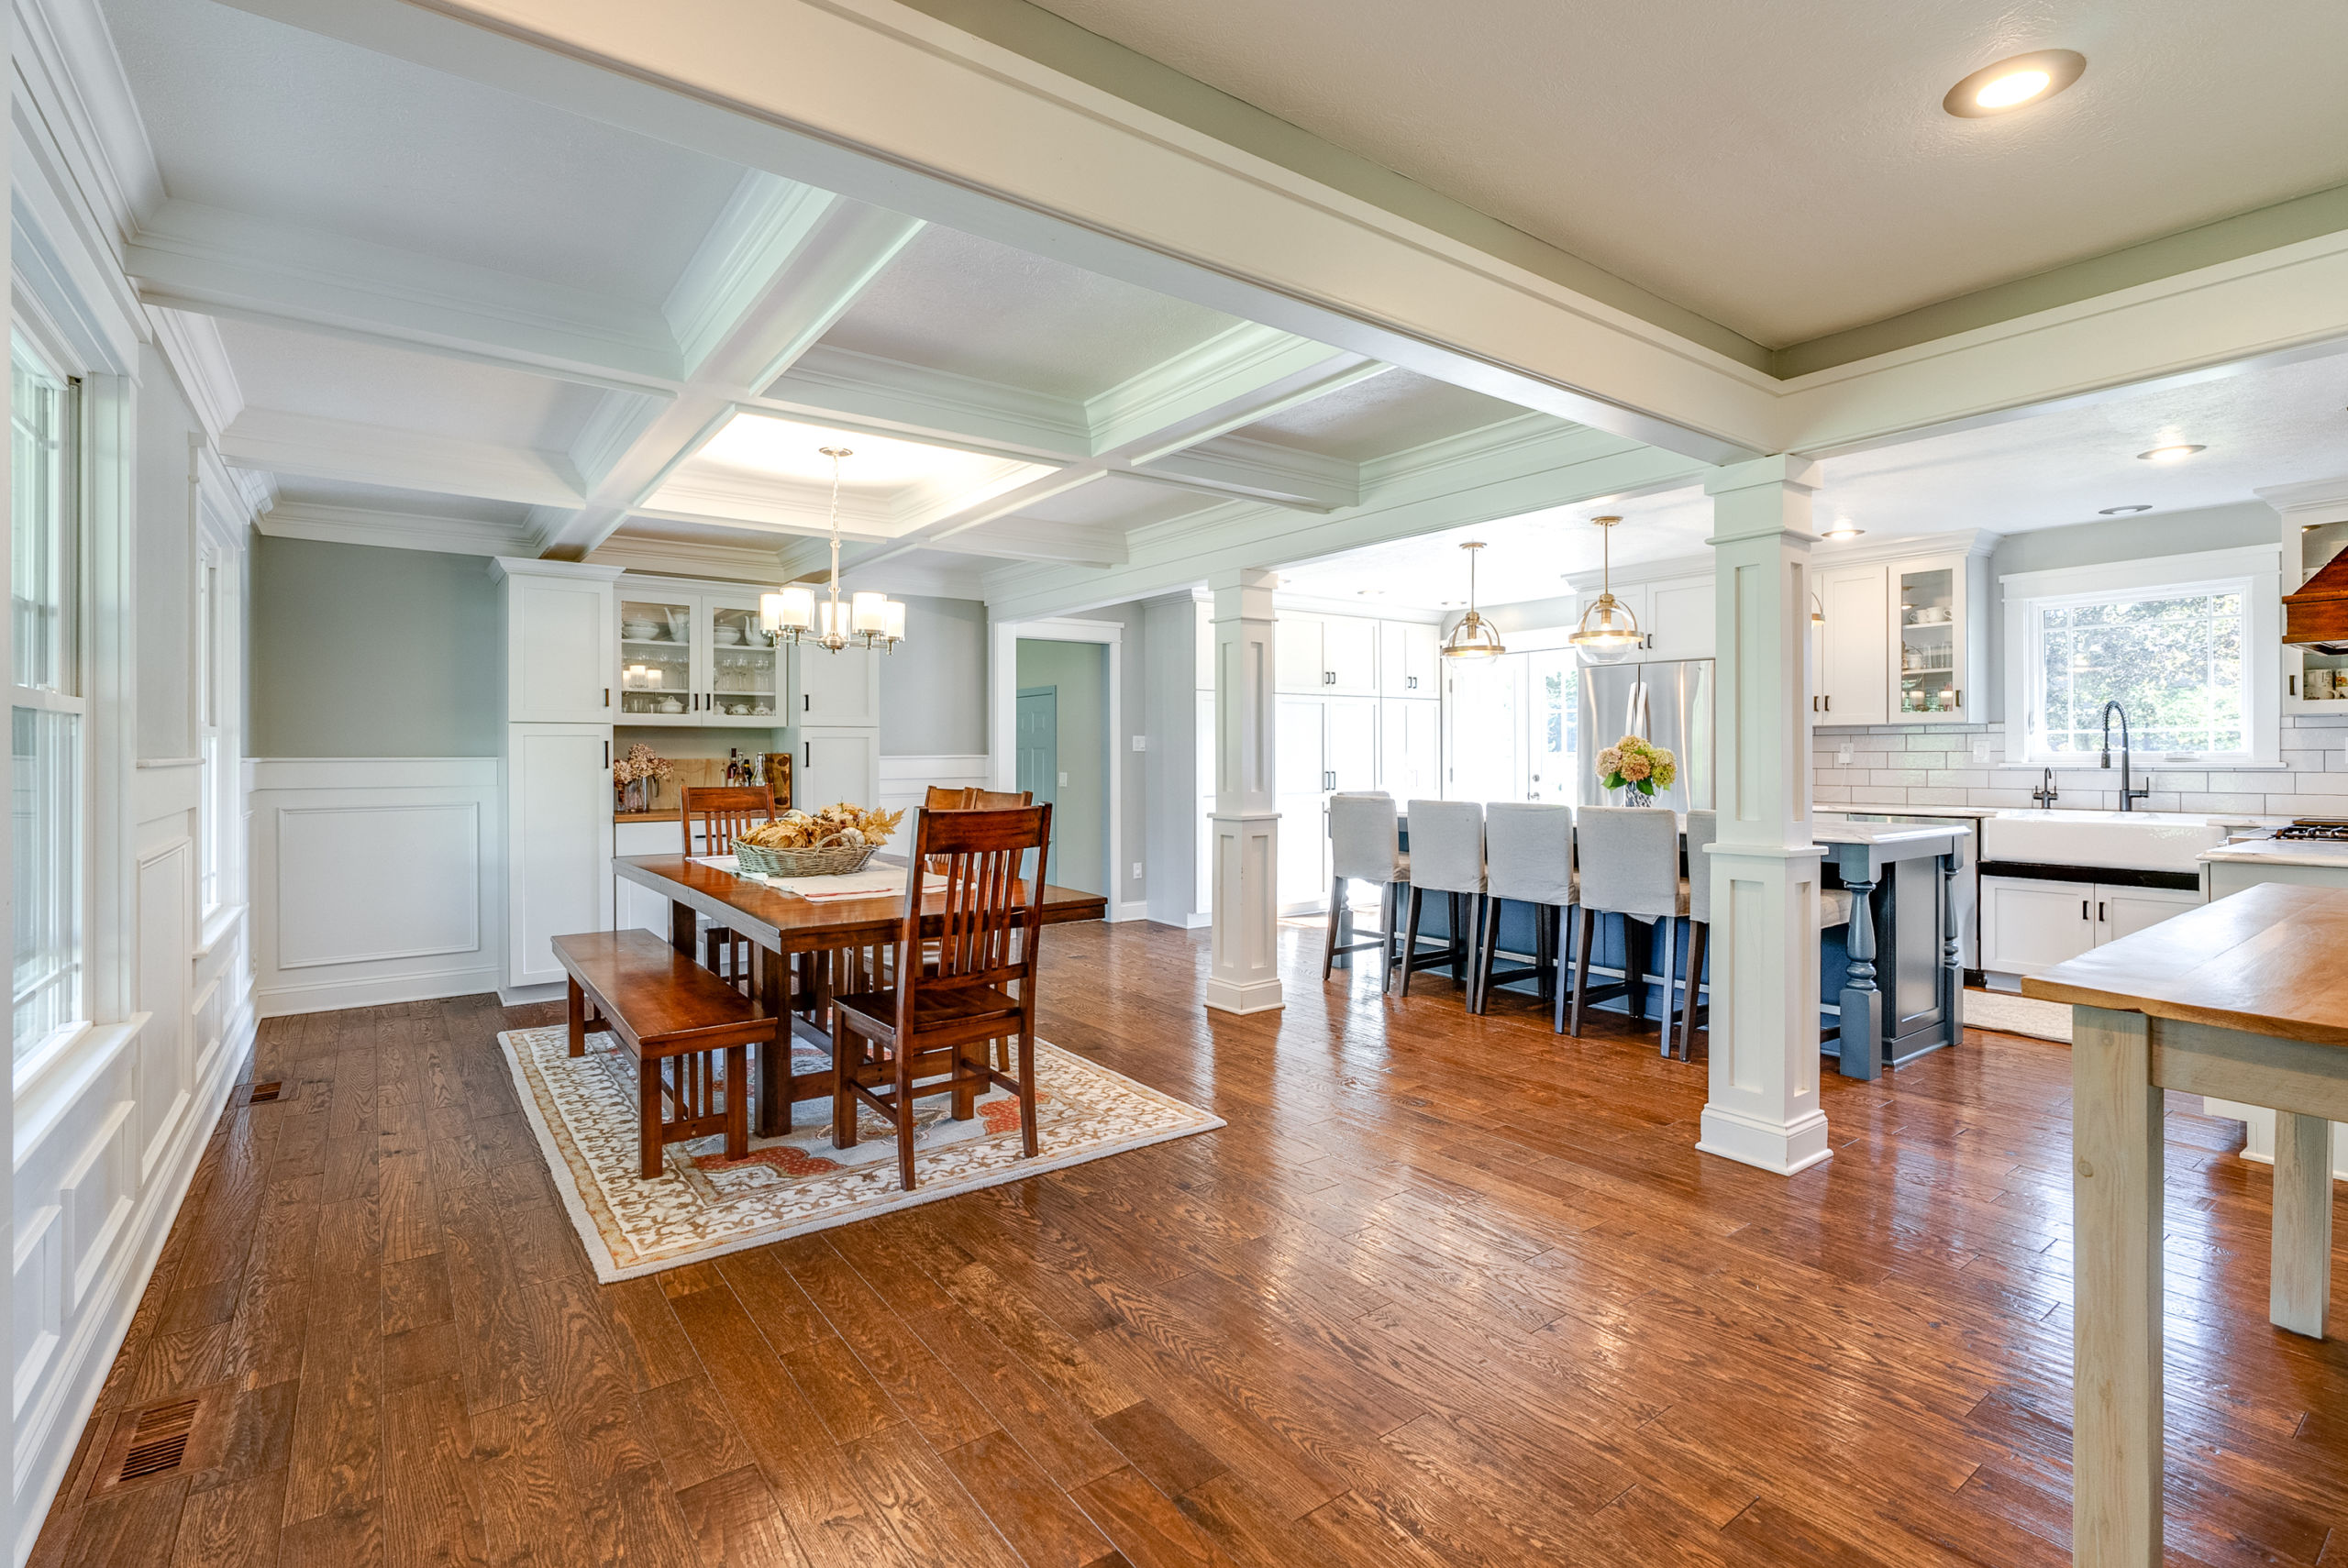 Showcasing the custom carpentry of the kitchen and dining room in Hudson, OH